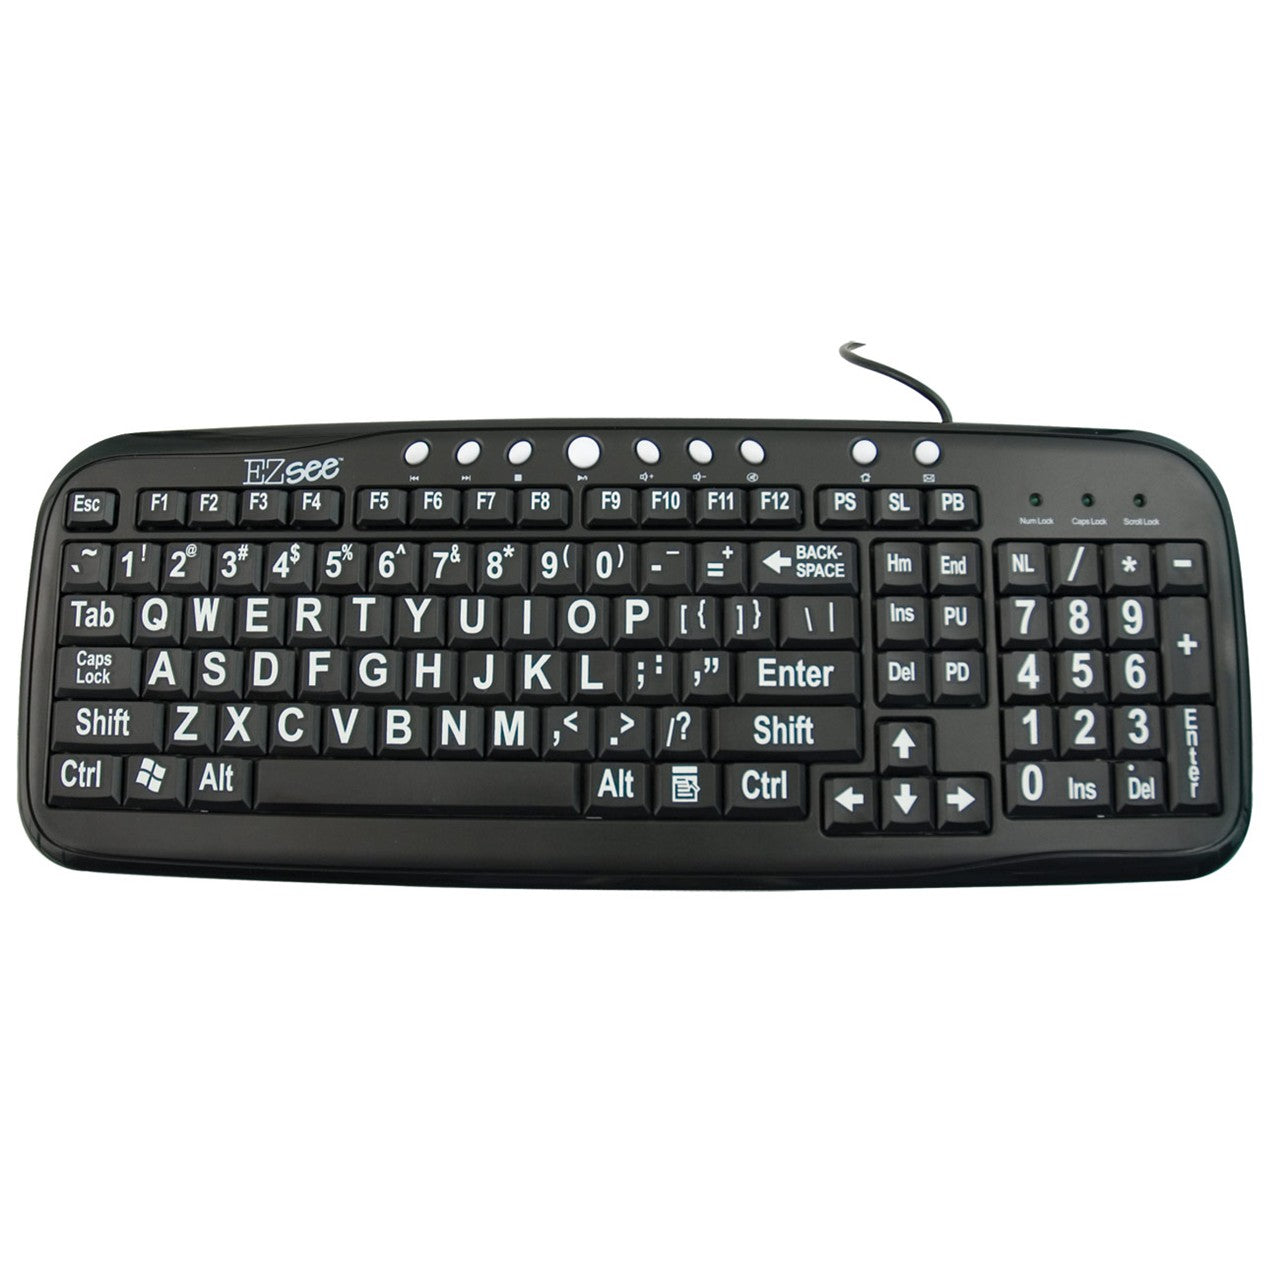 Large Print Black Keyboard with White Letters and Numbers